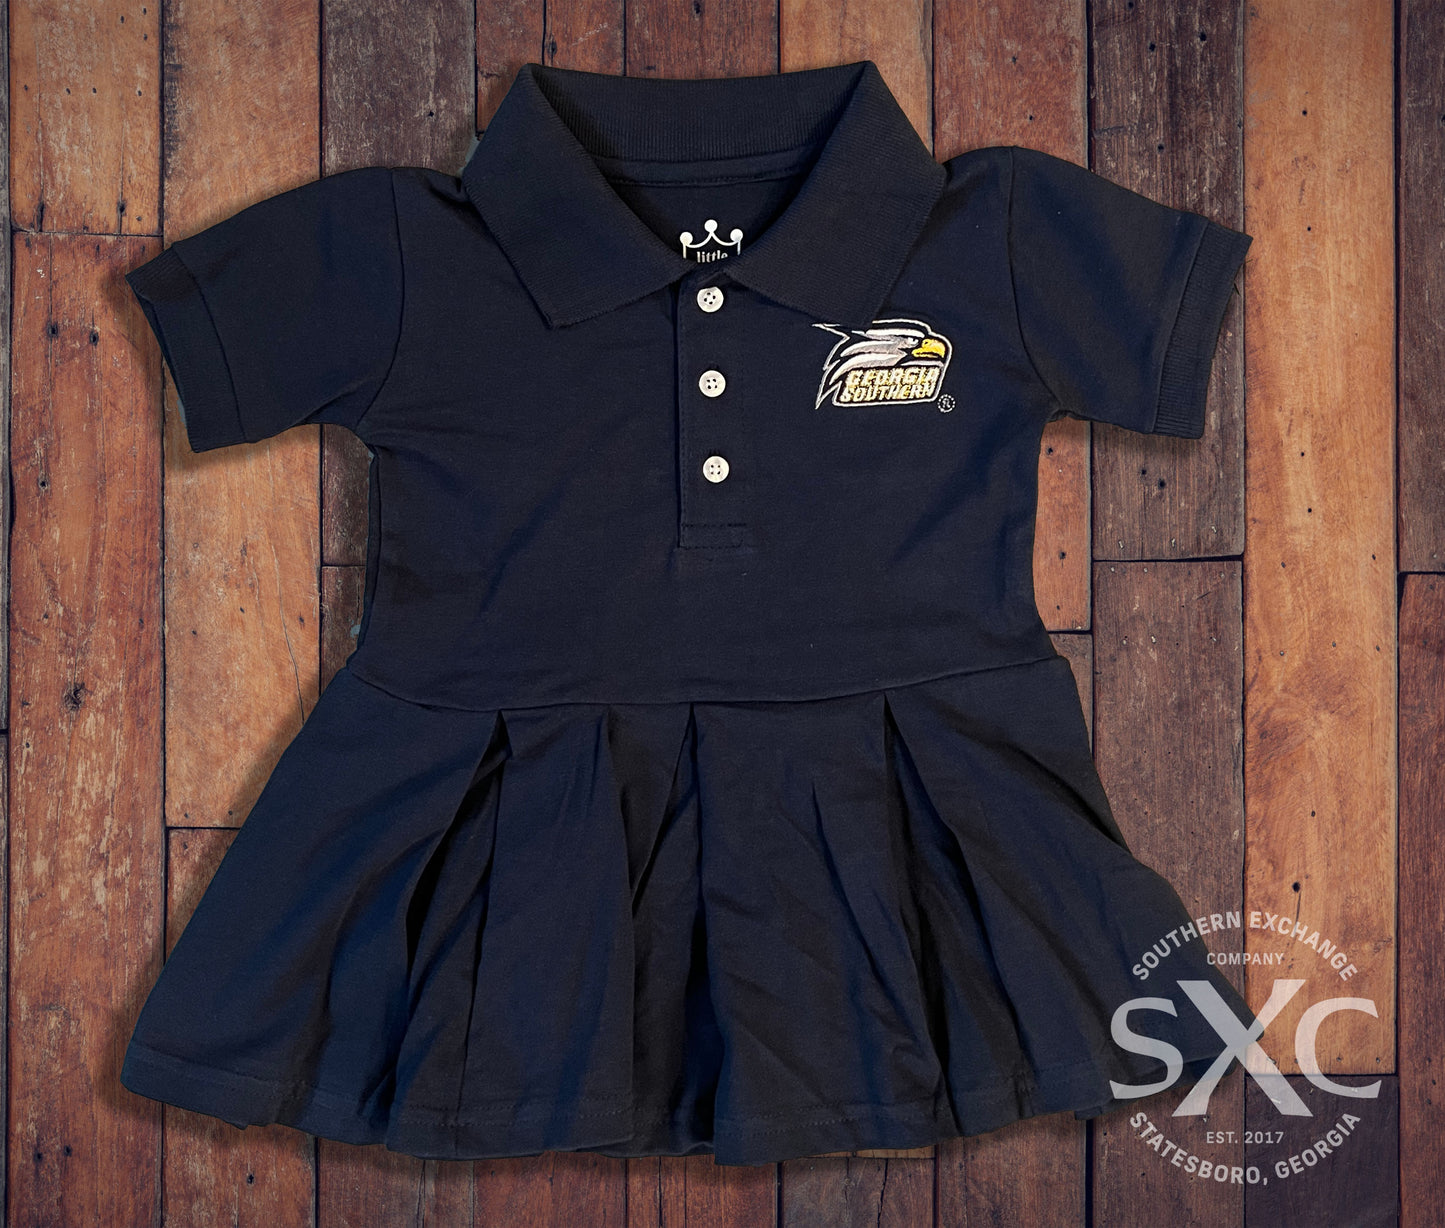 INFANT Polo Dress - by Little King